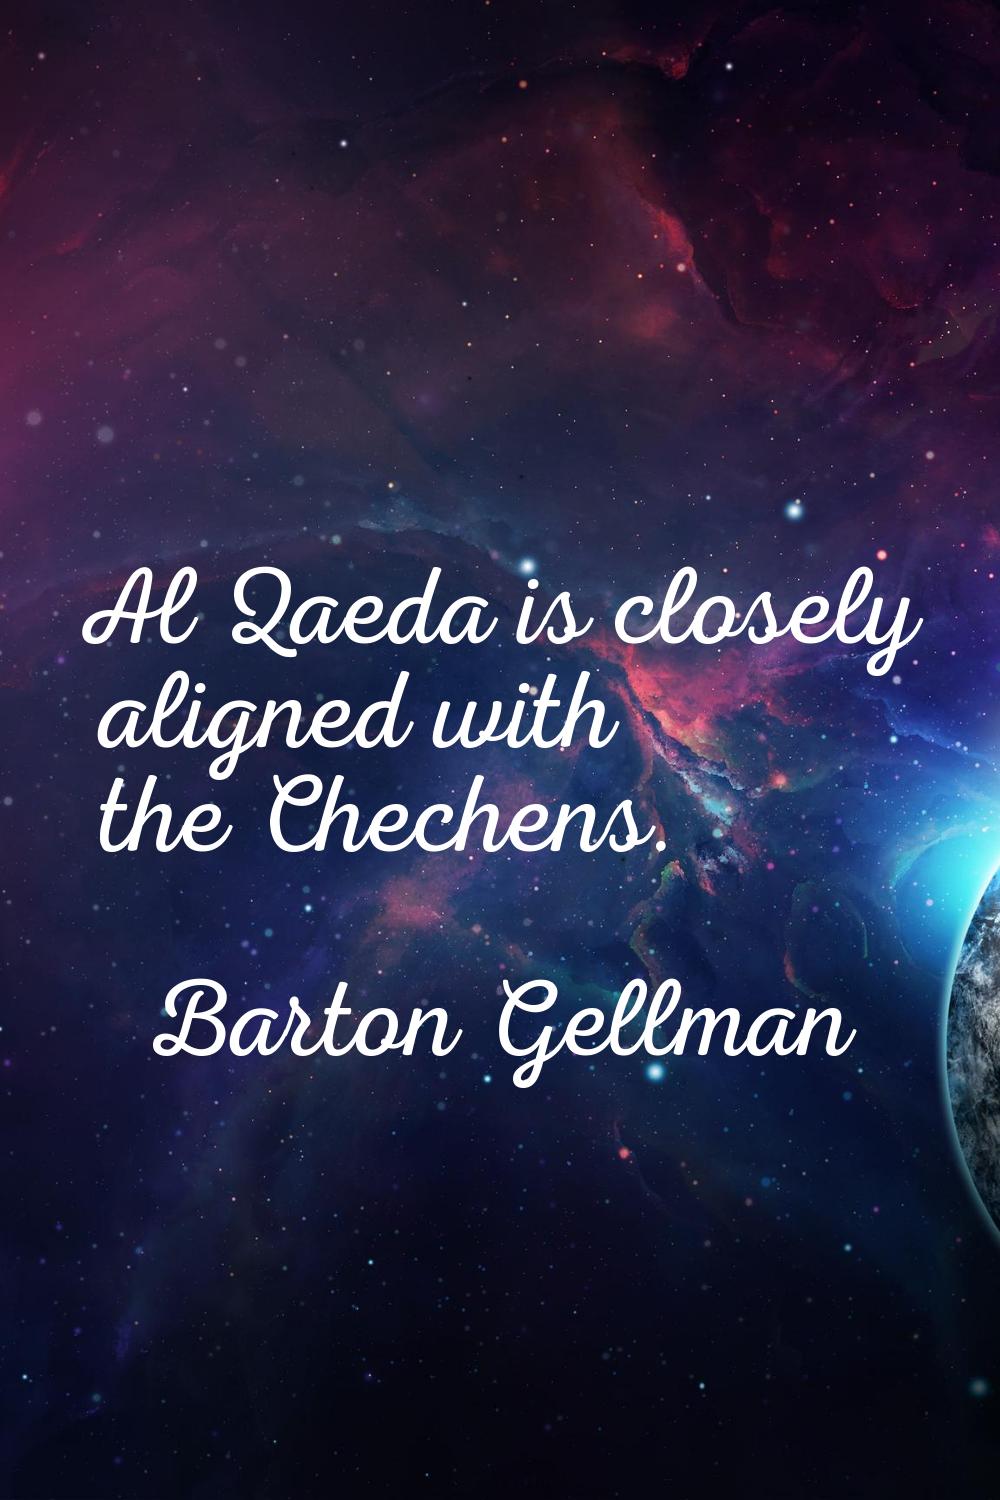 Al Qaeda is closely aligned with the Chechens.